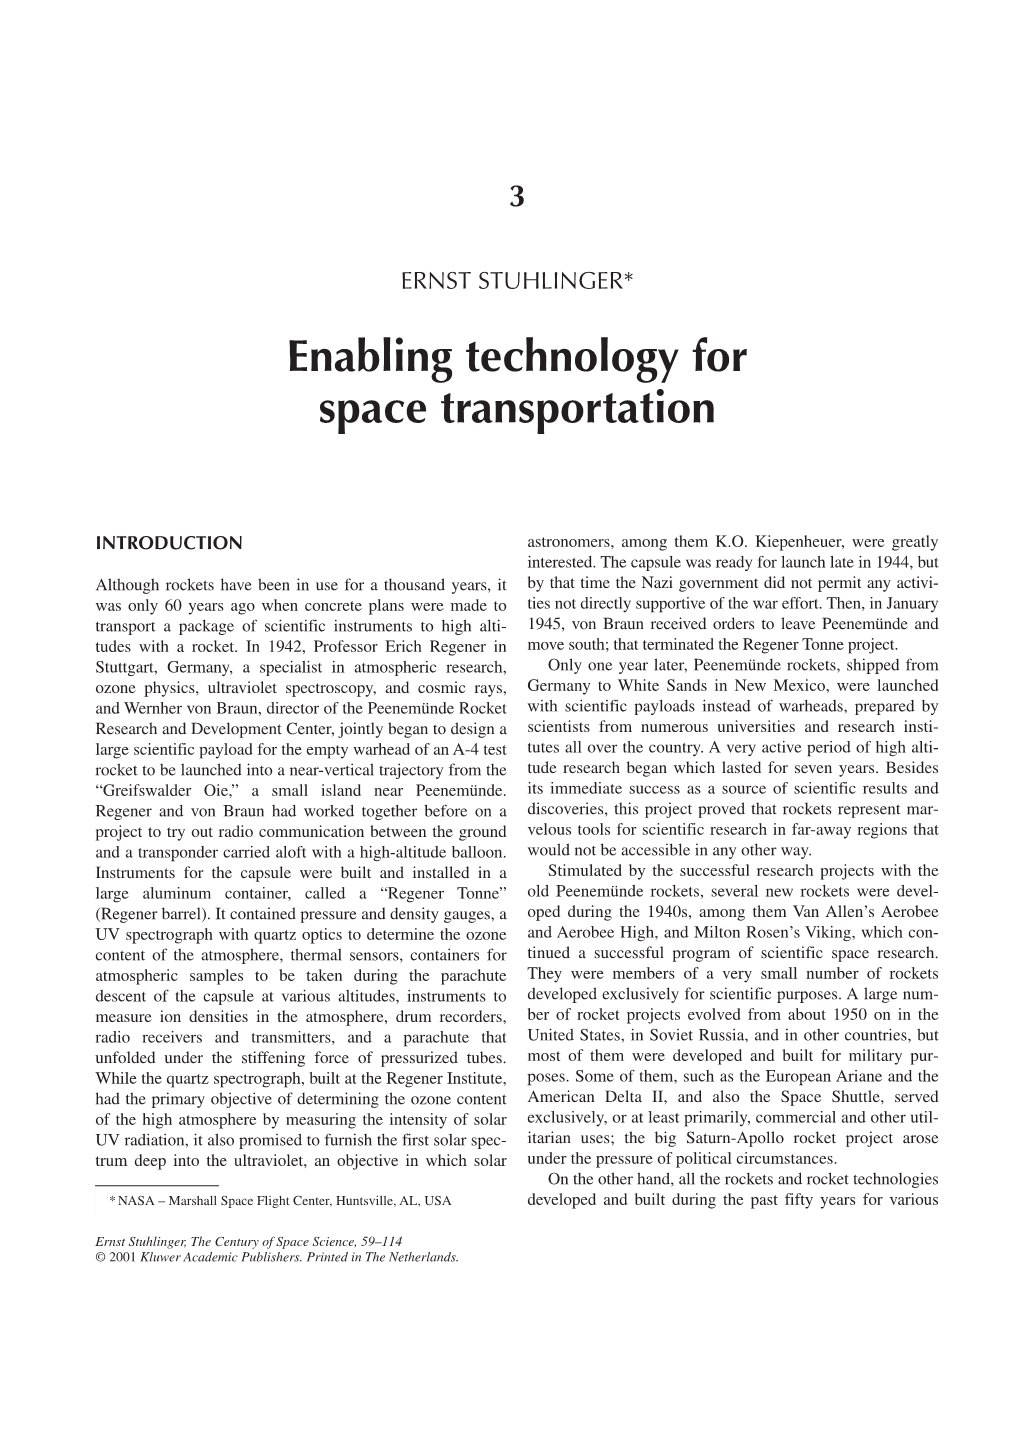 Enabling Technology for Space Transportation